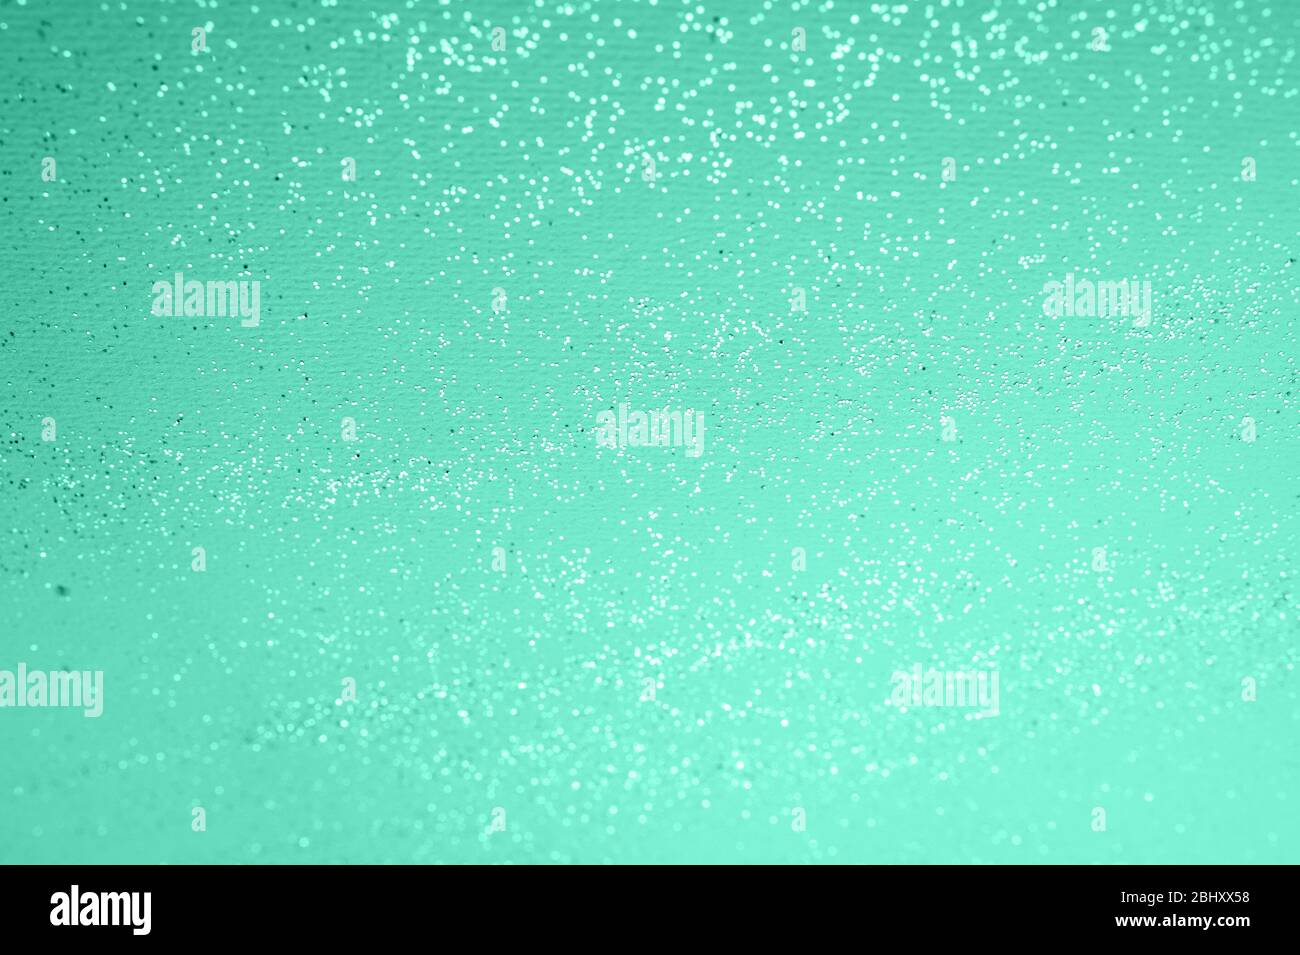 Abstract silver glitter background. High quality texture Stock Photo - Alamy